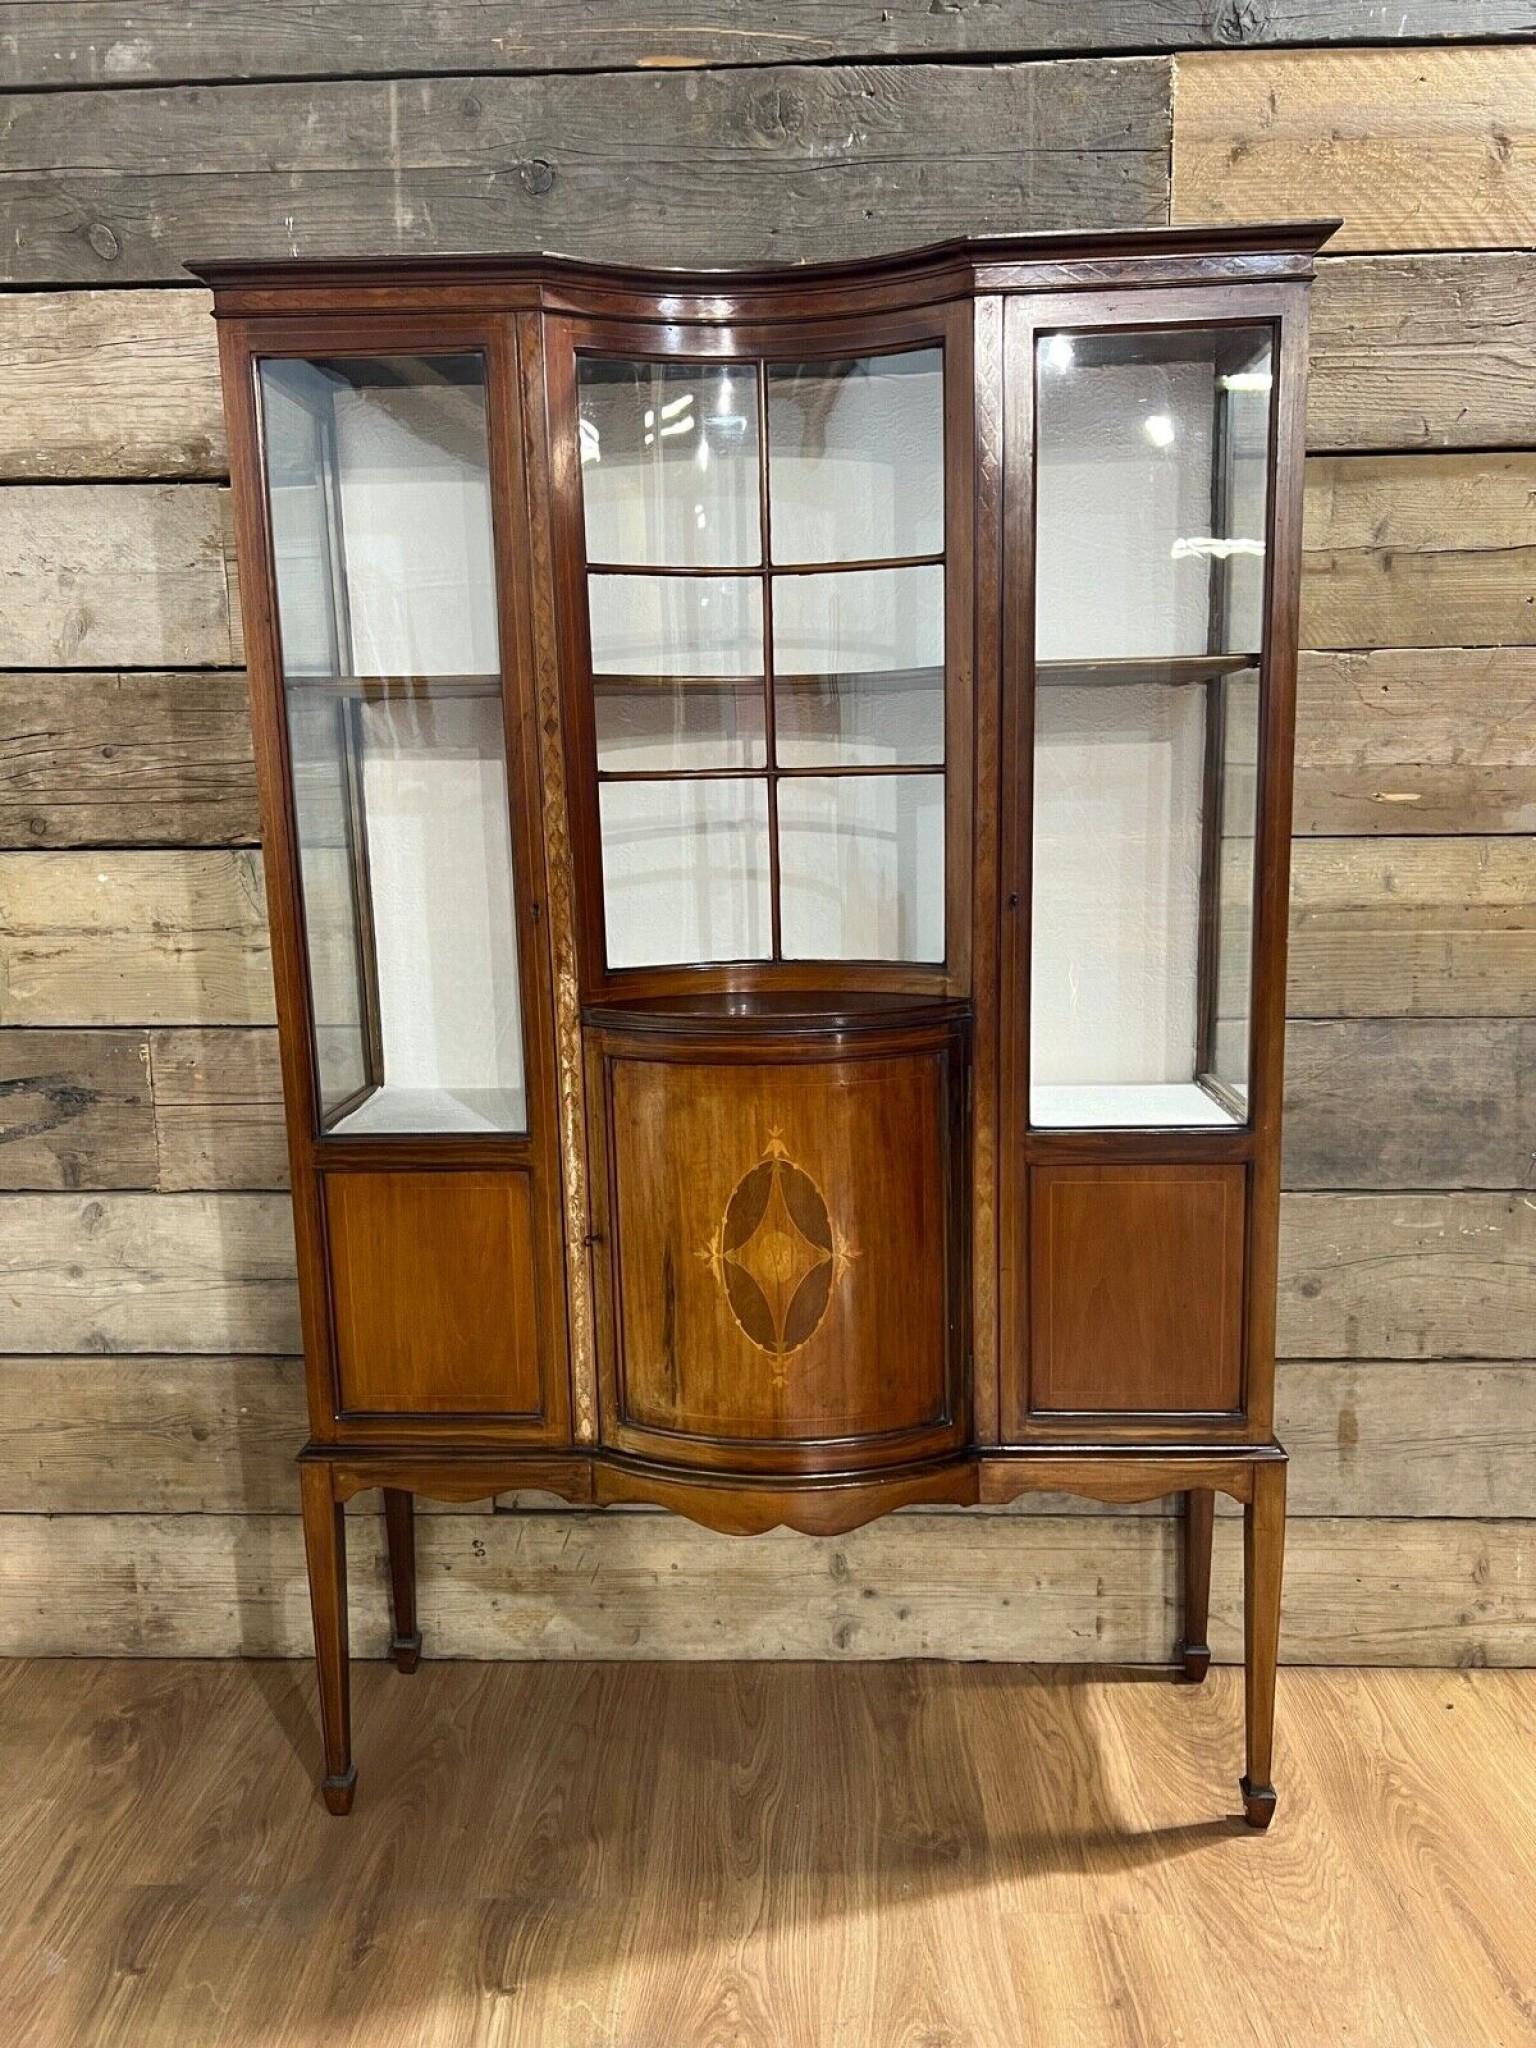 Early 20th Century Edwardian Display Cabinet Mahogany 1900 Inlay For Sale